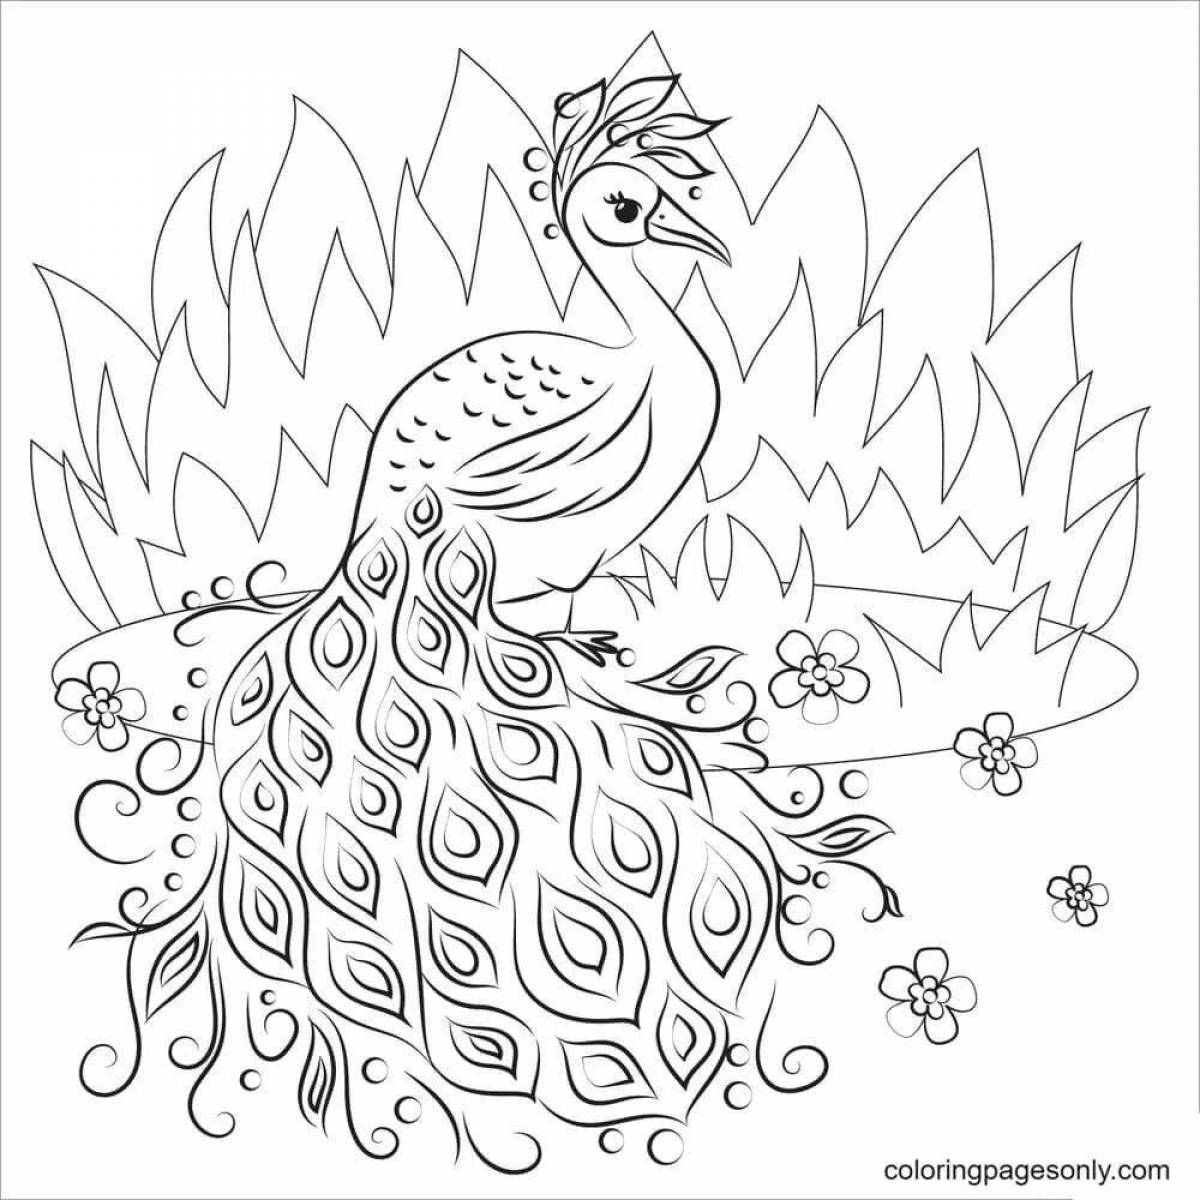 Children's firebird coloring pages